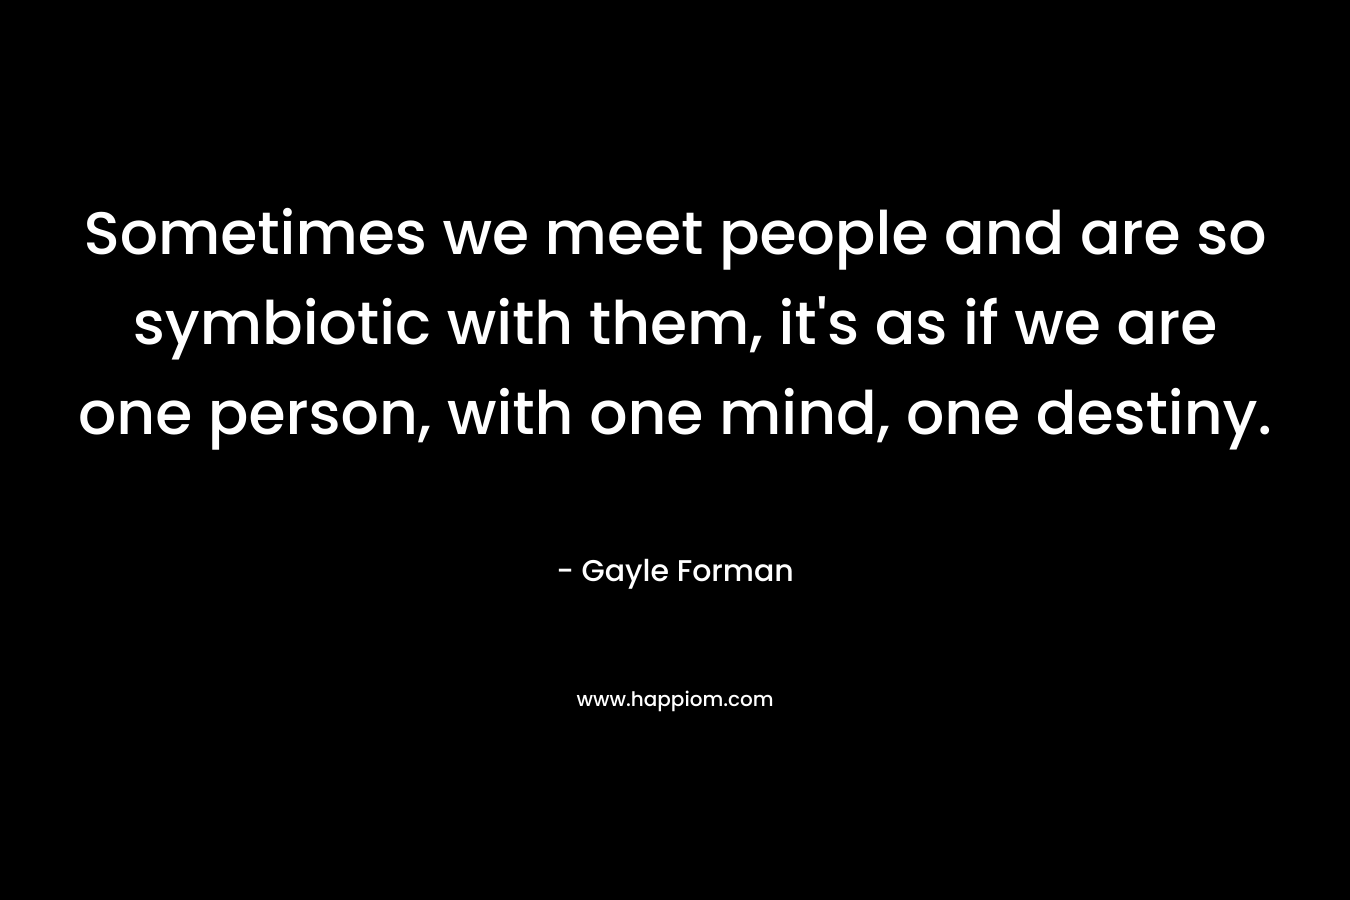 Sometimes we meet people and are so symbiotic with them, it's as if we are one person, with one mind, one destiny.